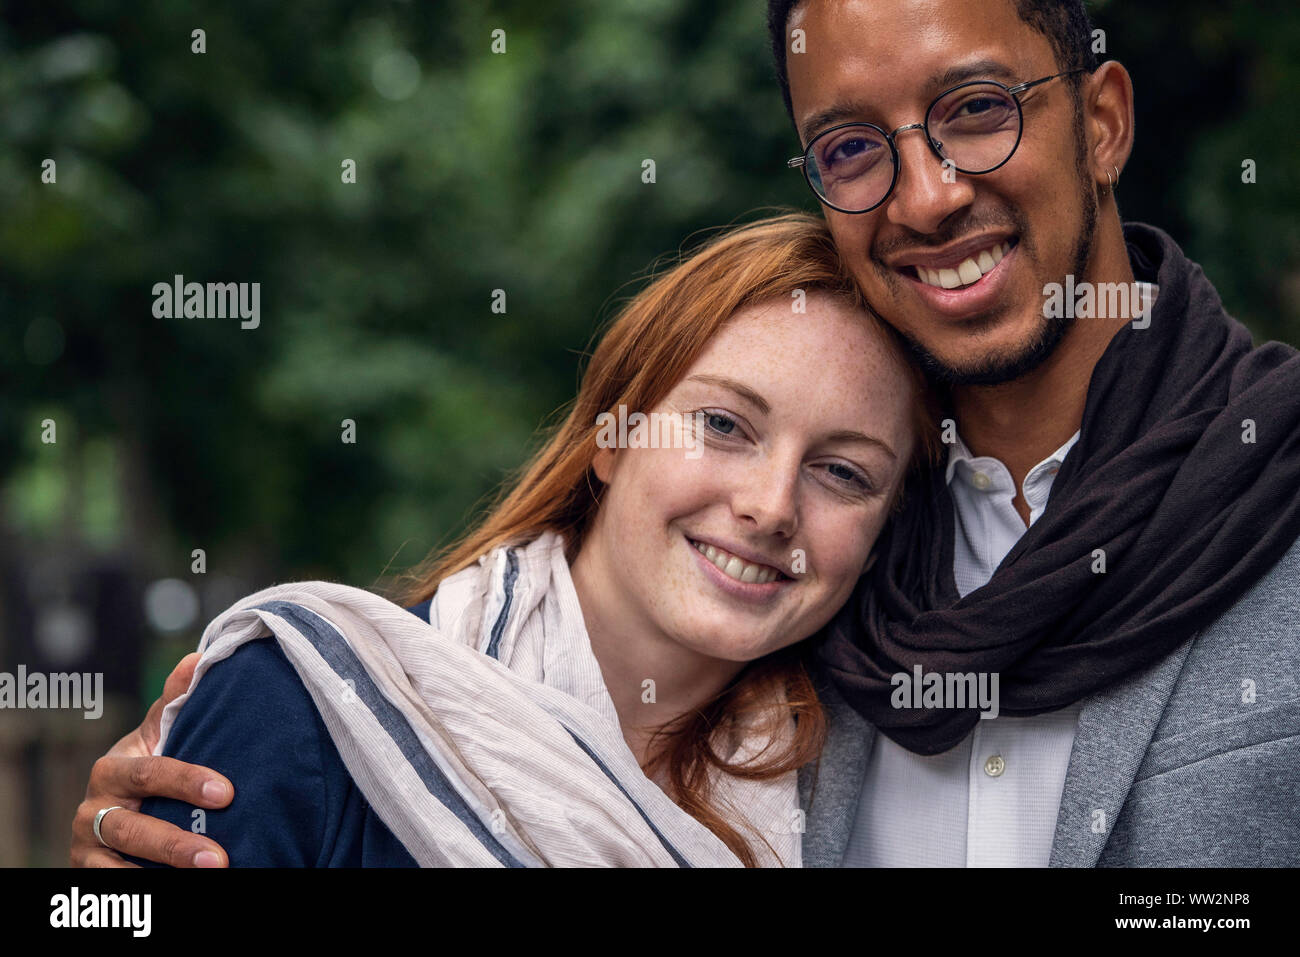 Couple standing outdoors Banque D'Images